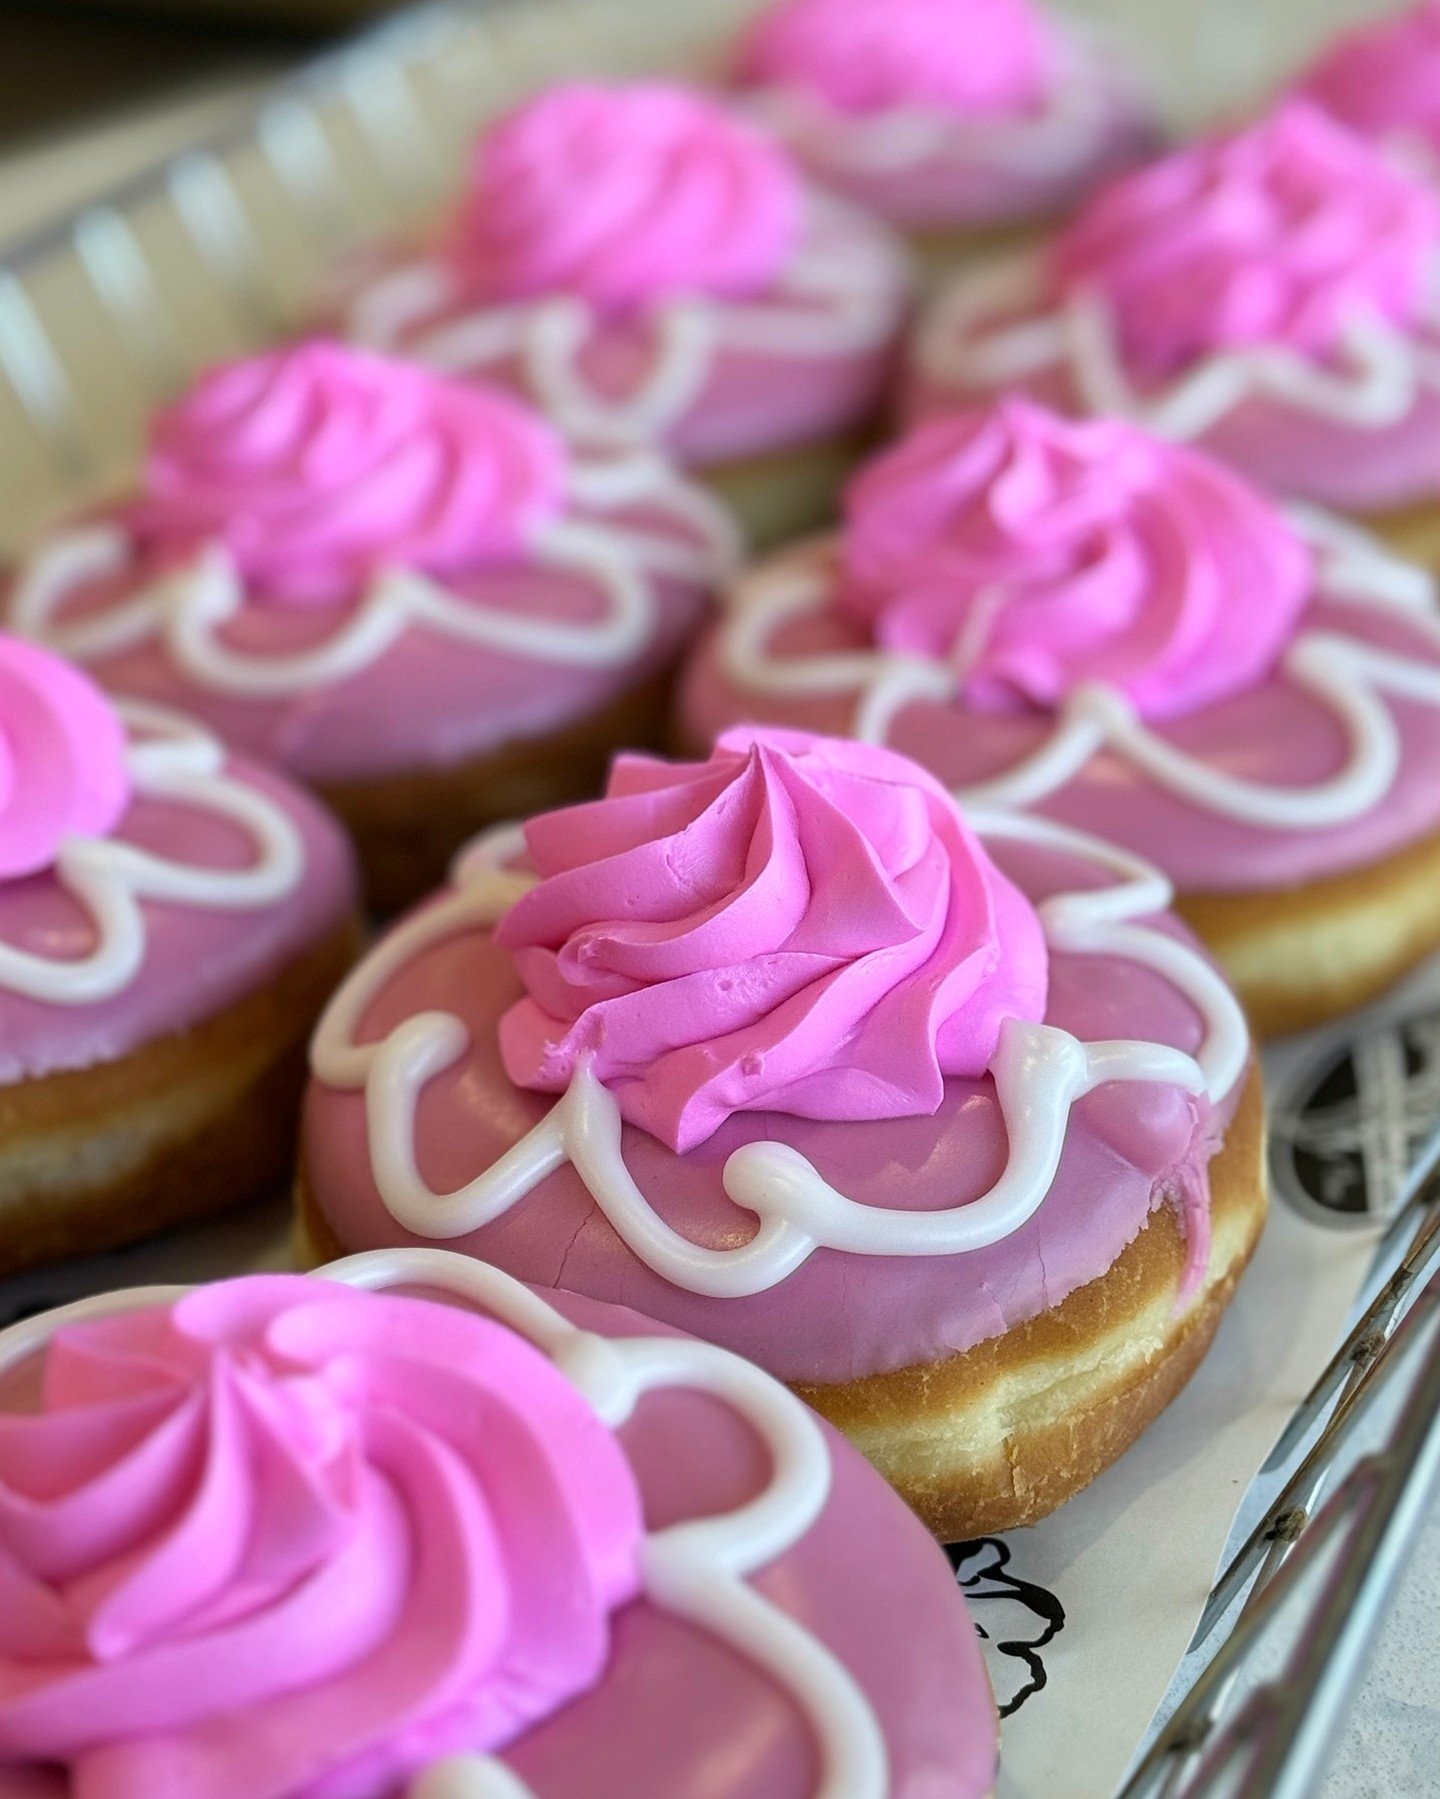 🌸🍩💖 Mother's Day is this Sunday! Make sure to grab her favorite donuts from Glenn Wayne Bakery and make her day extra sweet!

📍 Bohemia, NY
📞 631-256-5140
📞 631-319-6266
🌐 www.GlennWayne.com

#Bakery #Donuts #GlennWayneBakery #LongIsland #Long